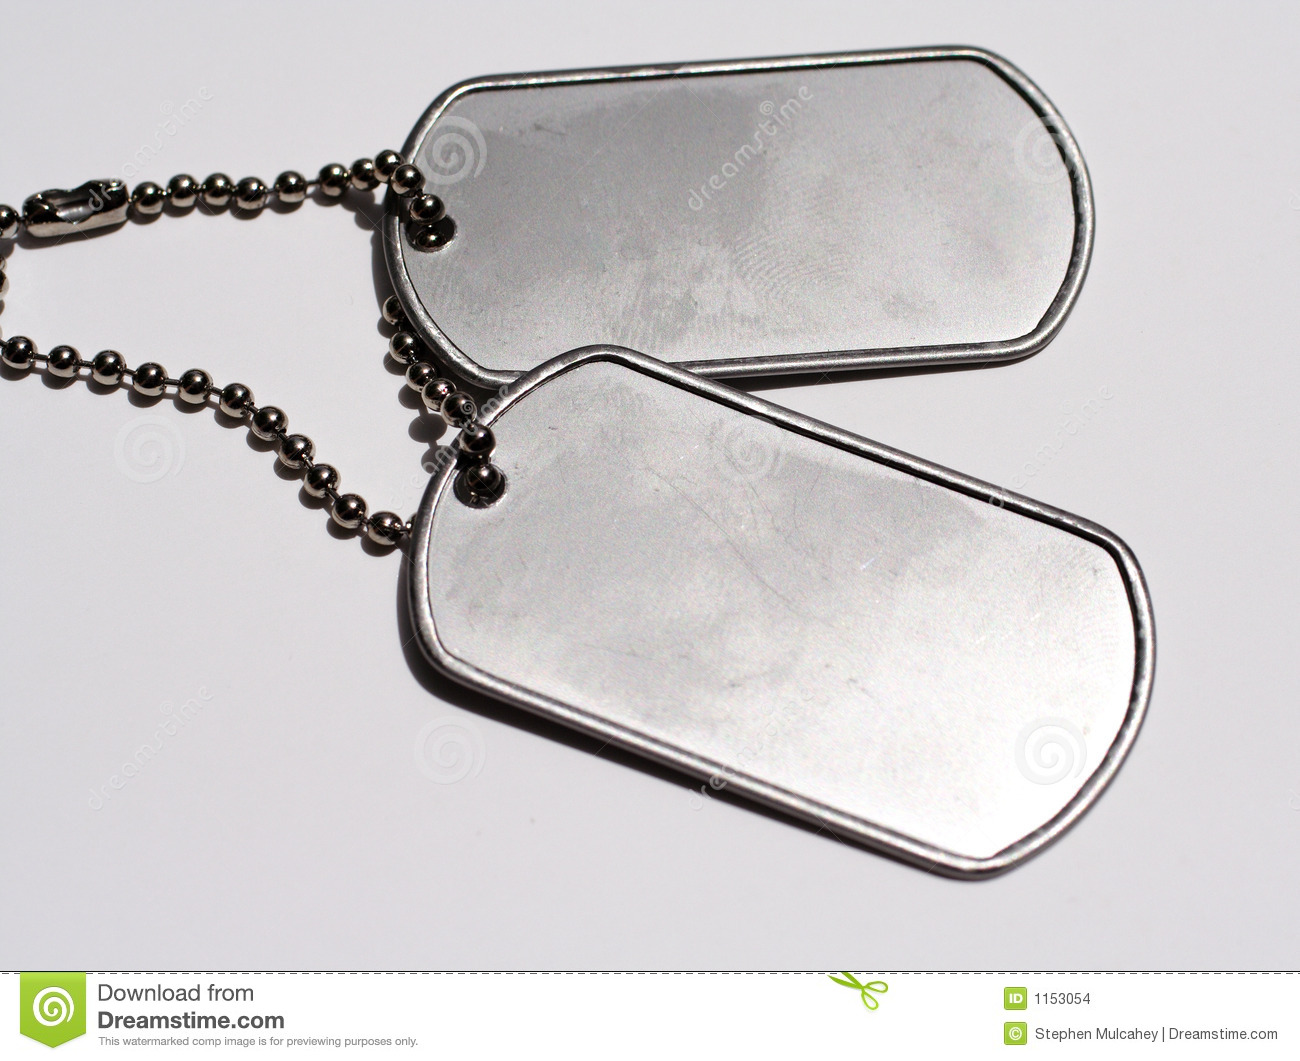 Military Dog Tags Stock Images   Image  1153054